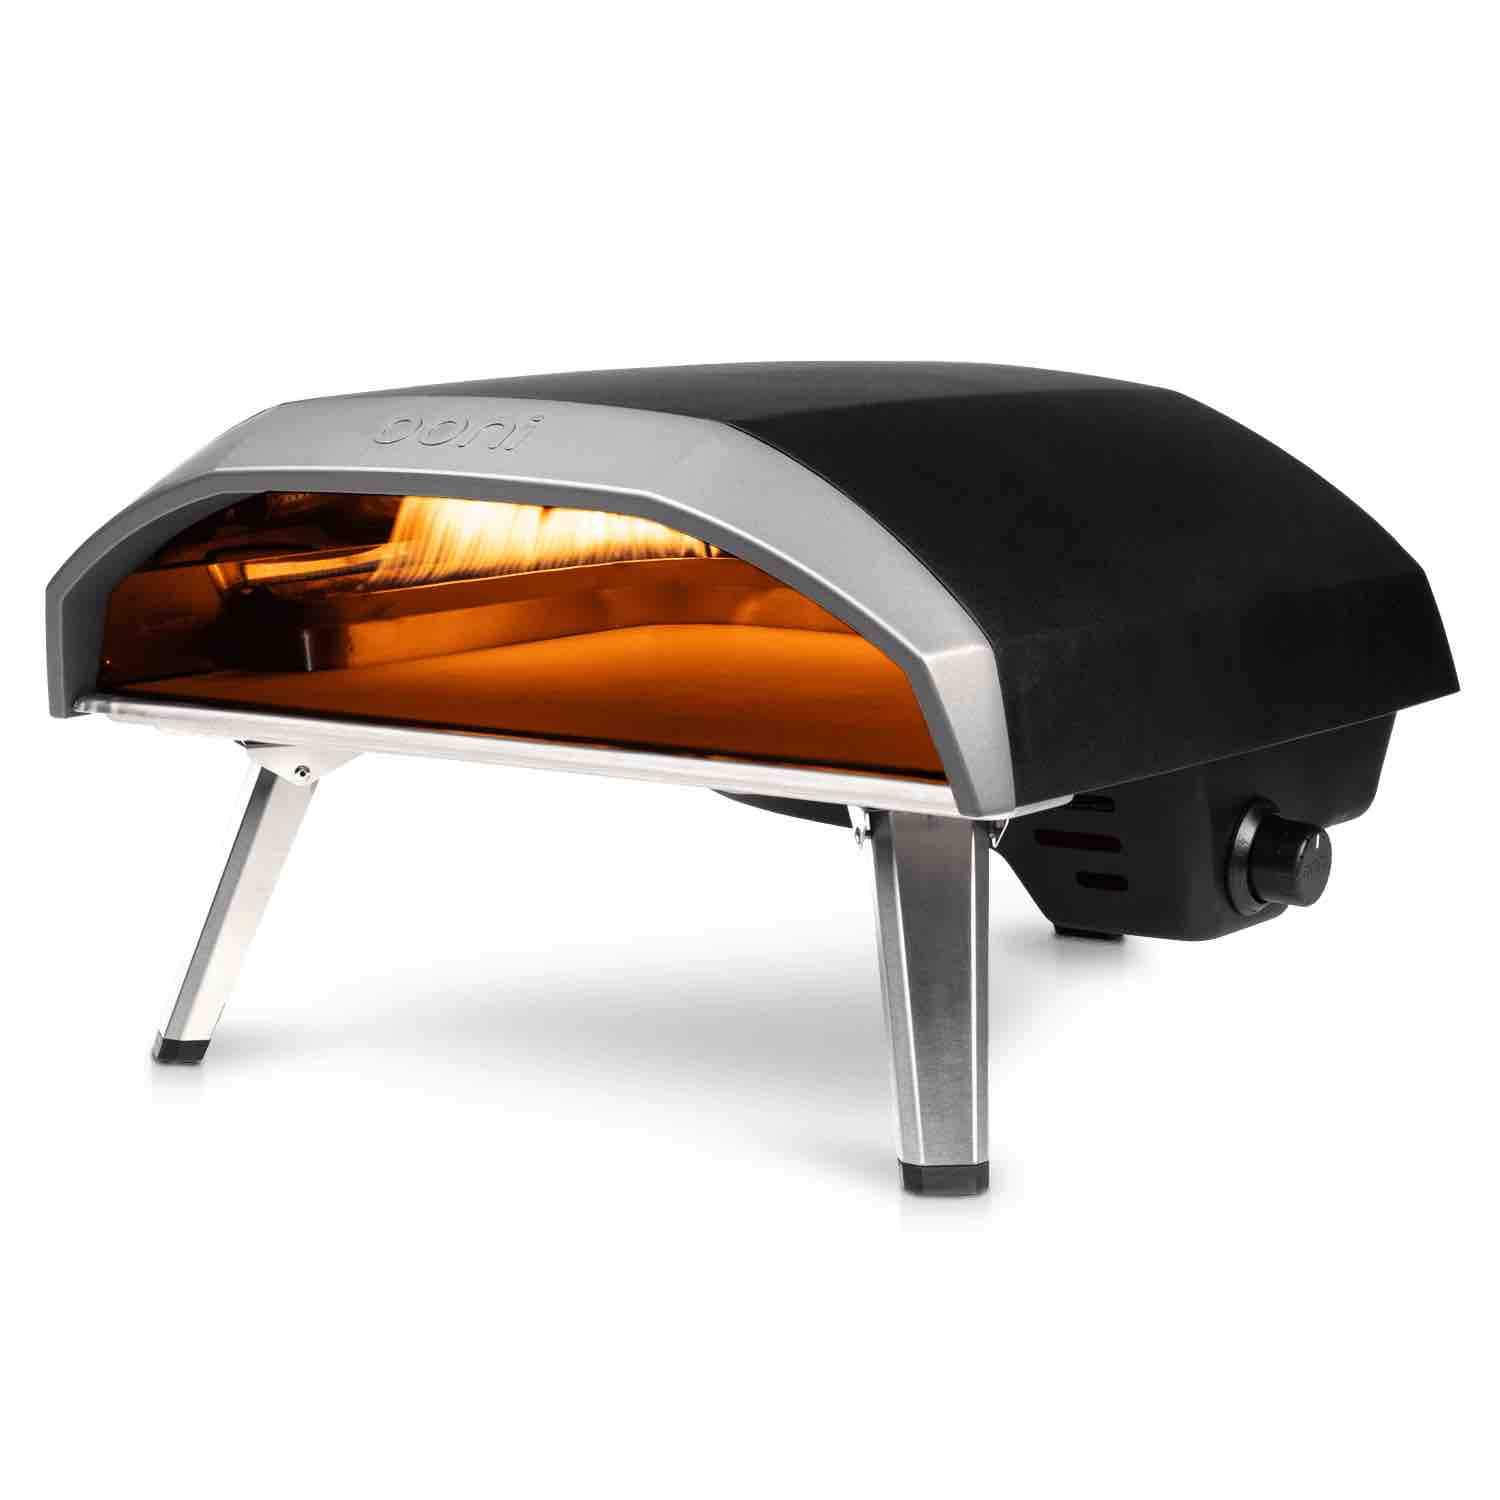 Ooni Pizza Oven Review: A True Masterpiece of Design and Technology 3